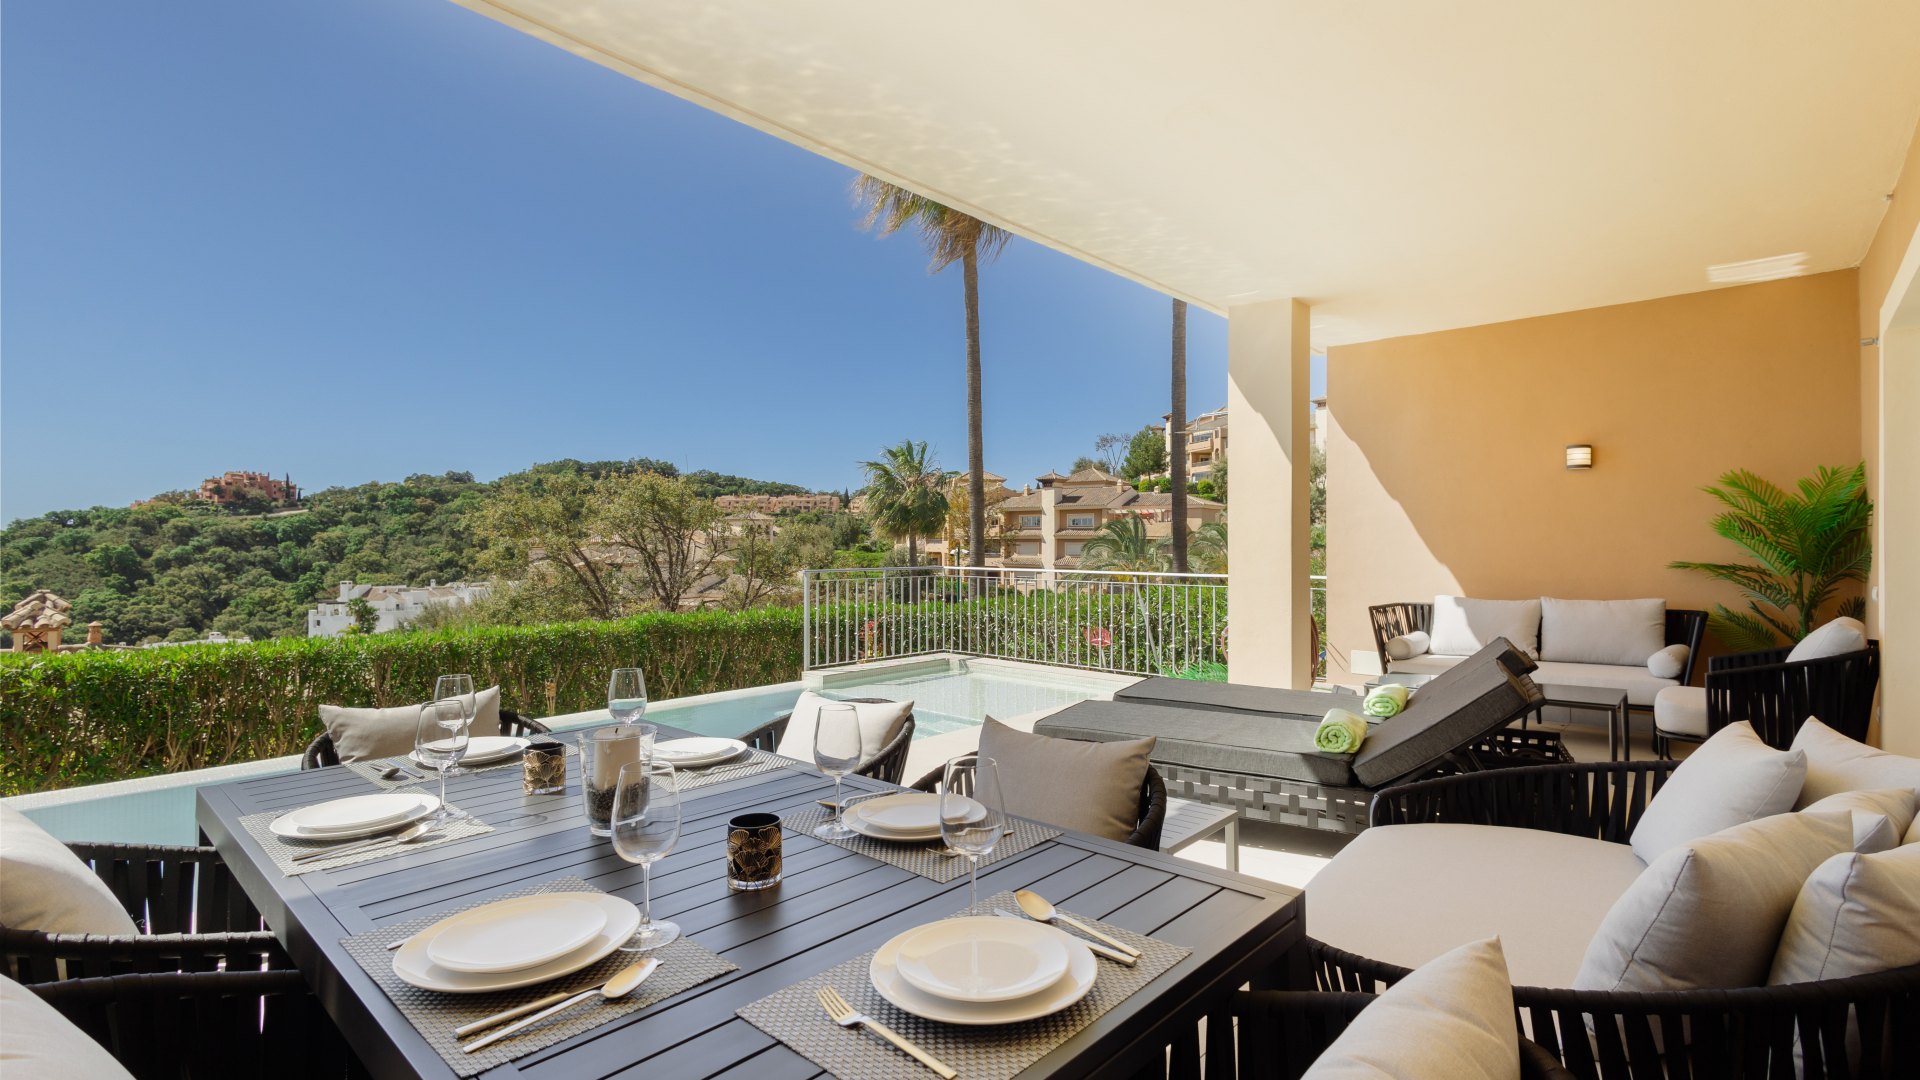 Apartment with private pool in La Mairena, Elviria, Marbella. Sea views, 3 large bedrooms and 3 bathrooms